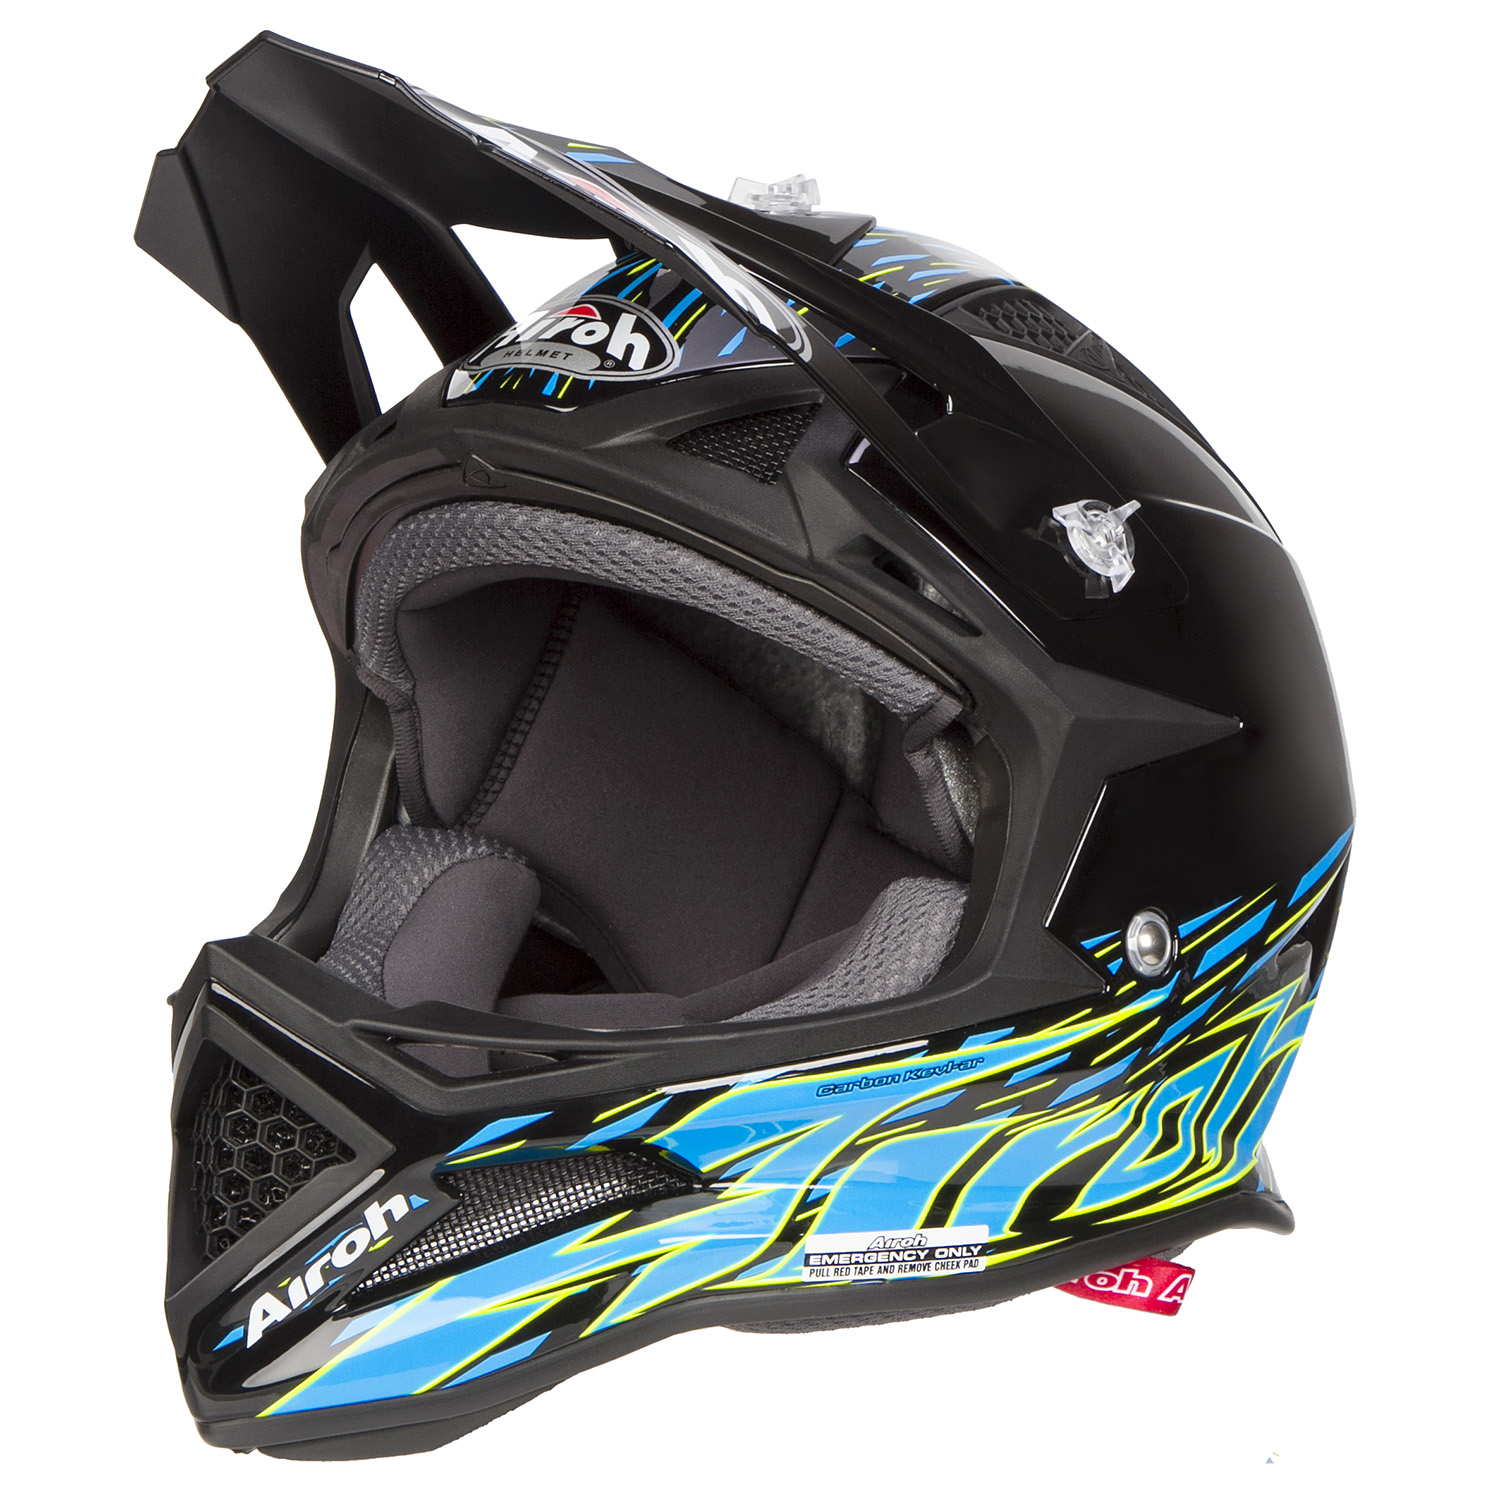 Airoh Casque VTT Downhill Fighters Trace - Gloss Black